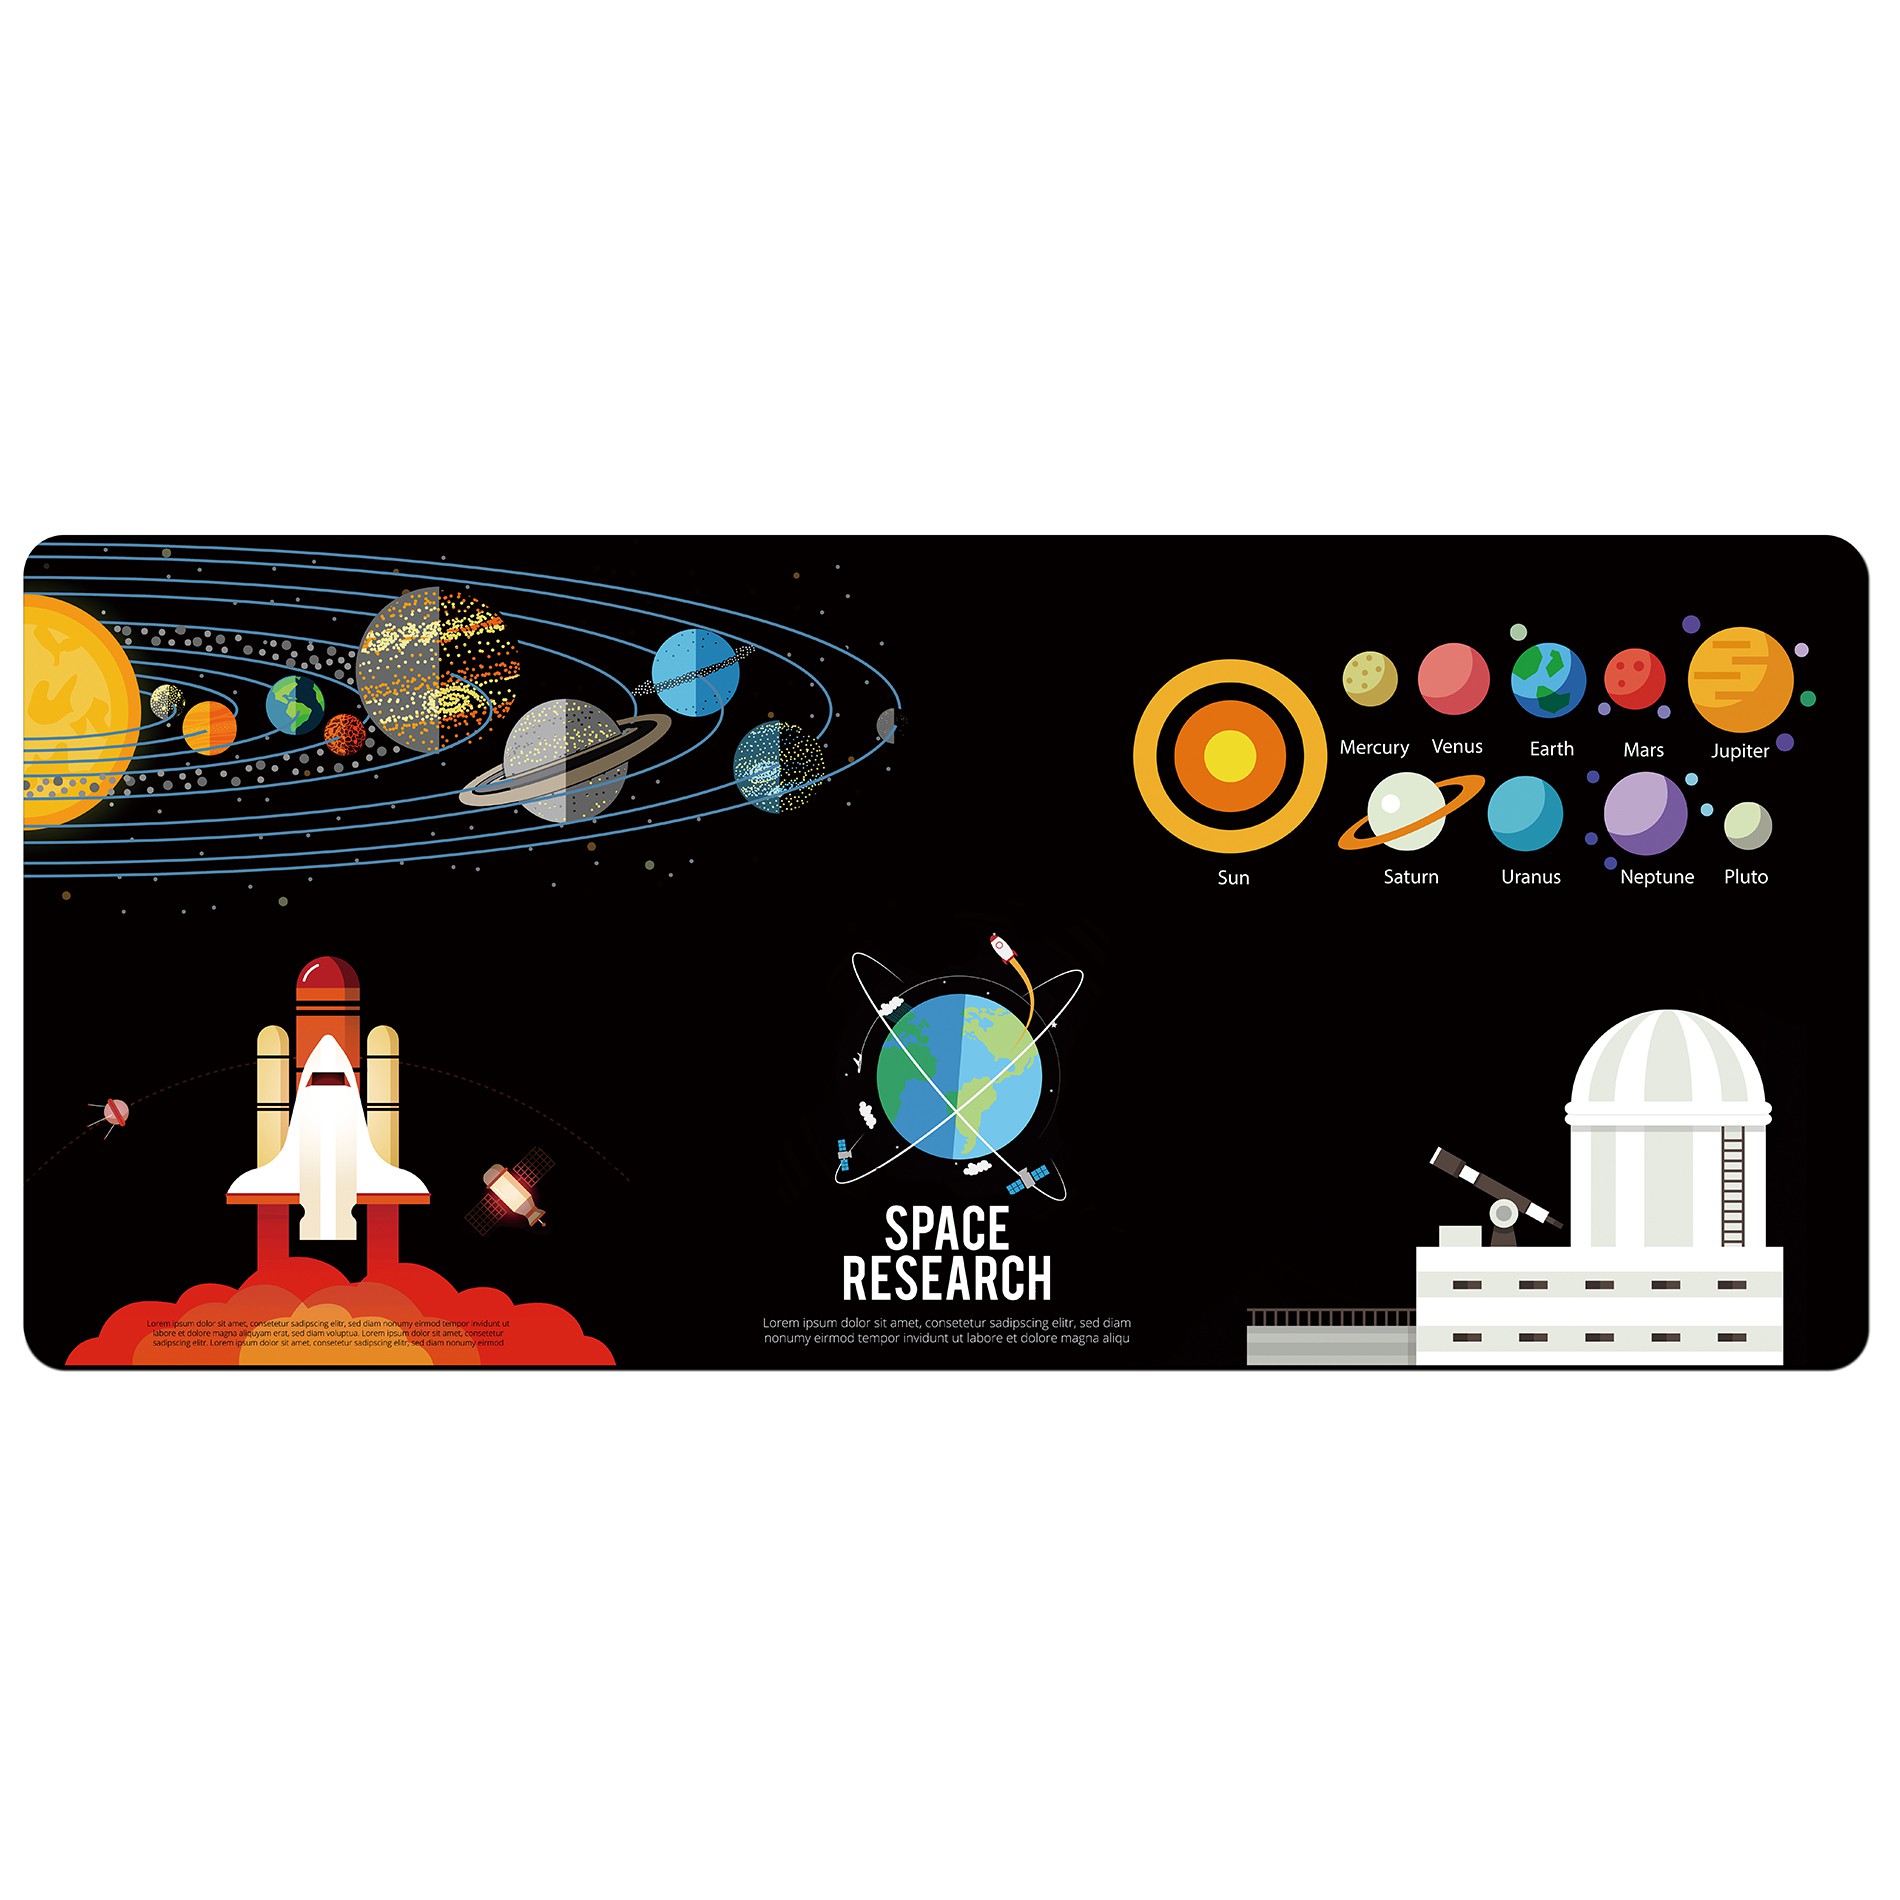 Explore the starry sky series oversized mouse pad solar system planet astronaut creative gaming chicken design desktop pad